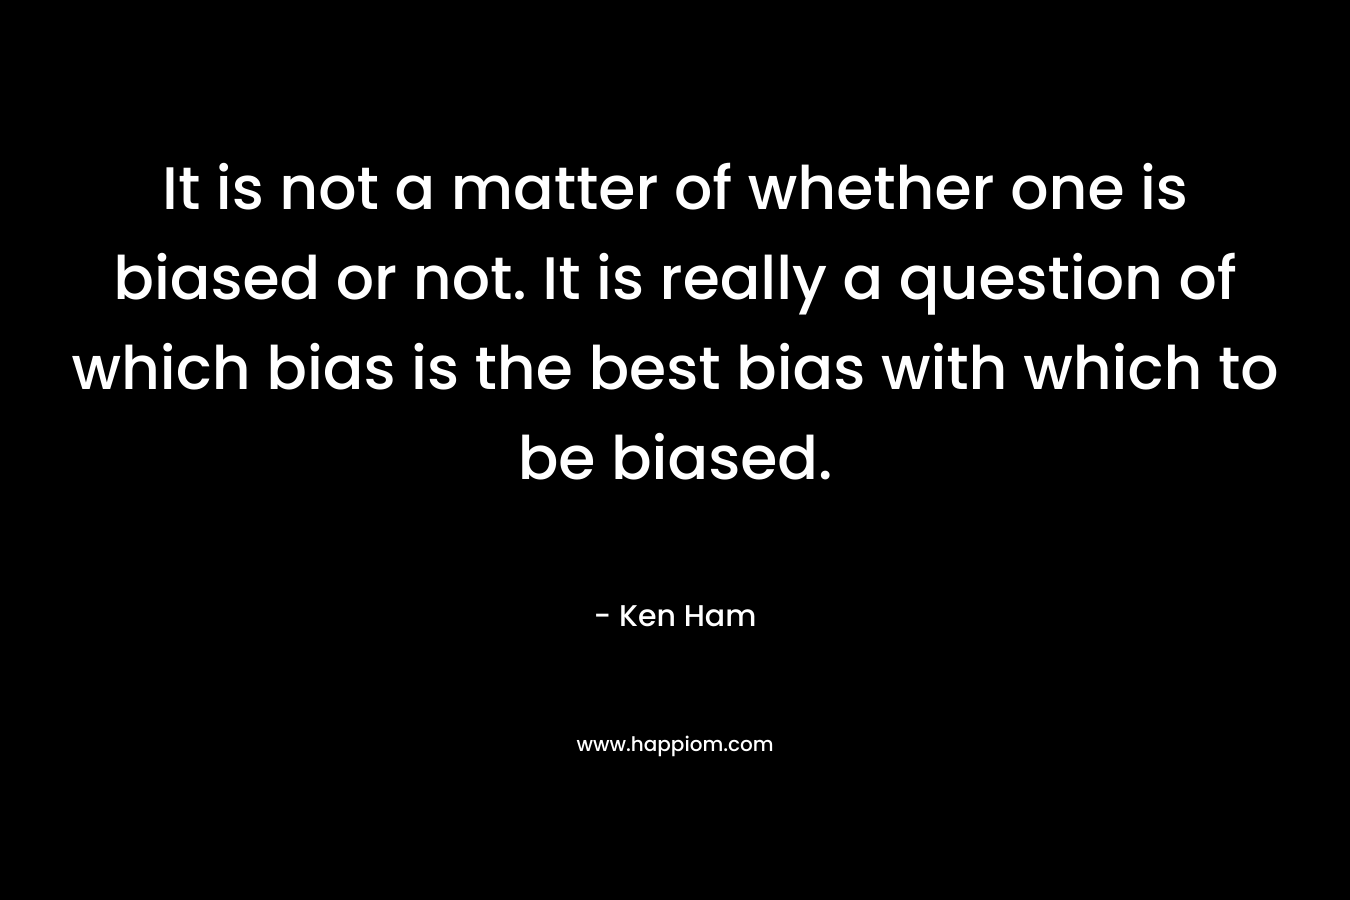 It is not a matter of whether one is biased or not. It is really a question of which bias is the best bias with which to be biased. – Ken Ham